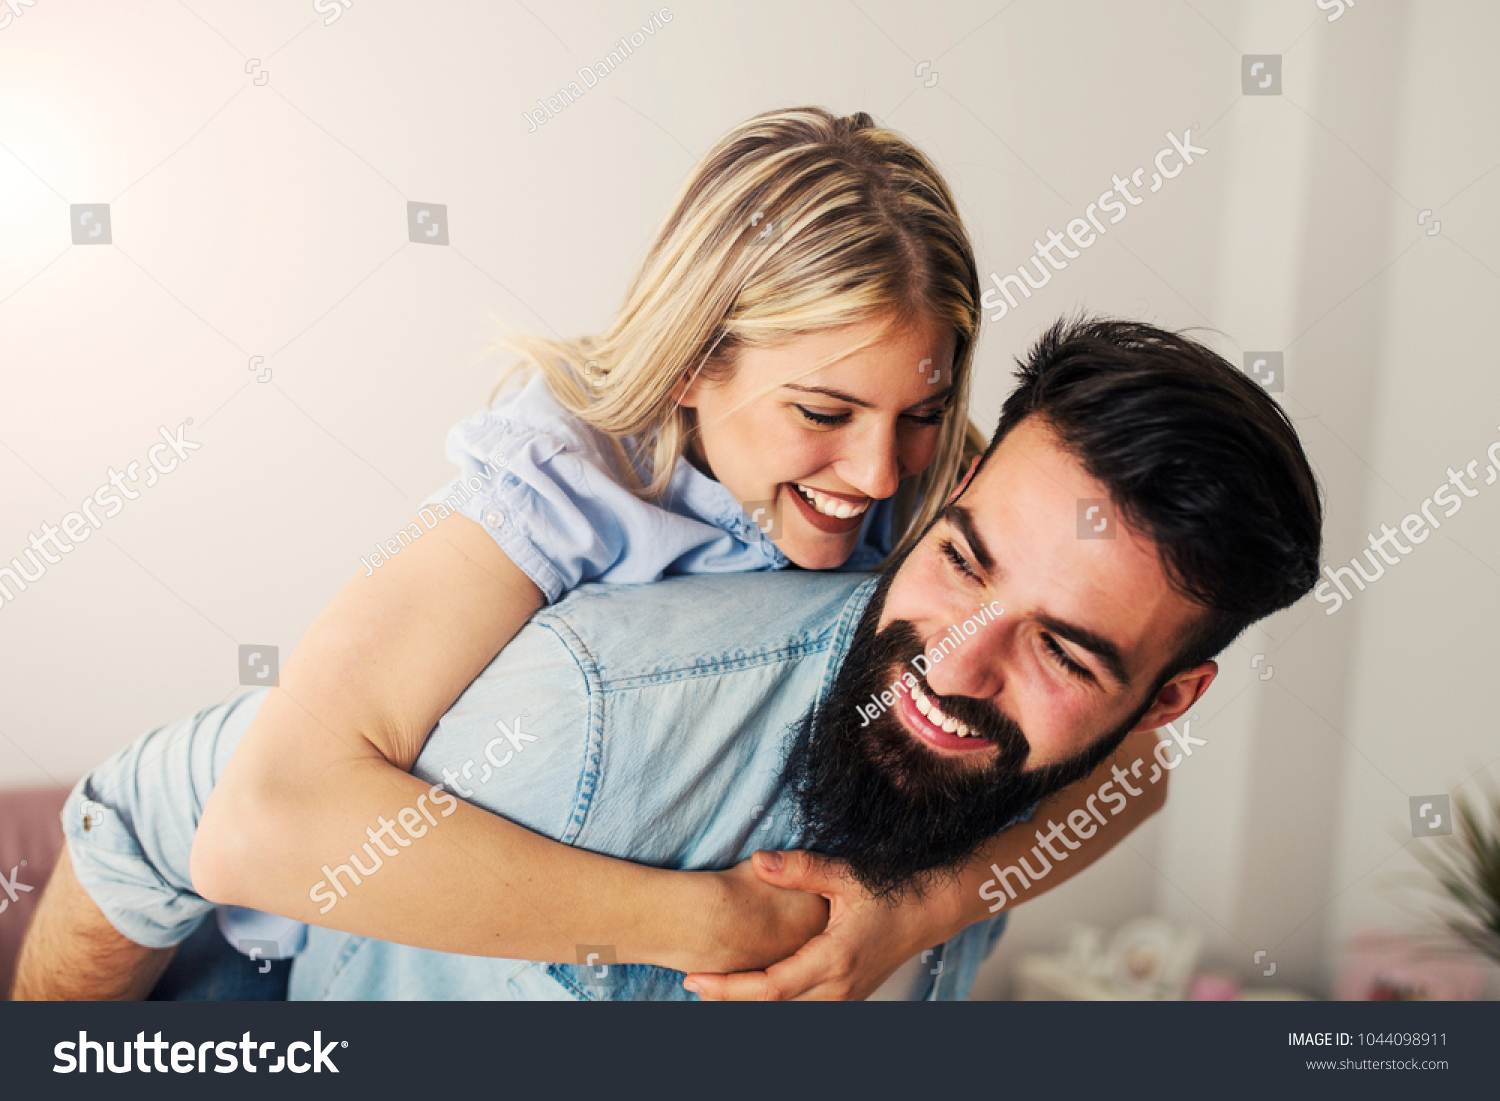 Modern young bearded man carrying his laughing girlfriend around #1044098911